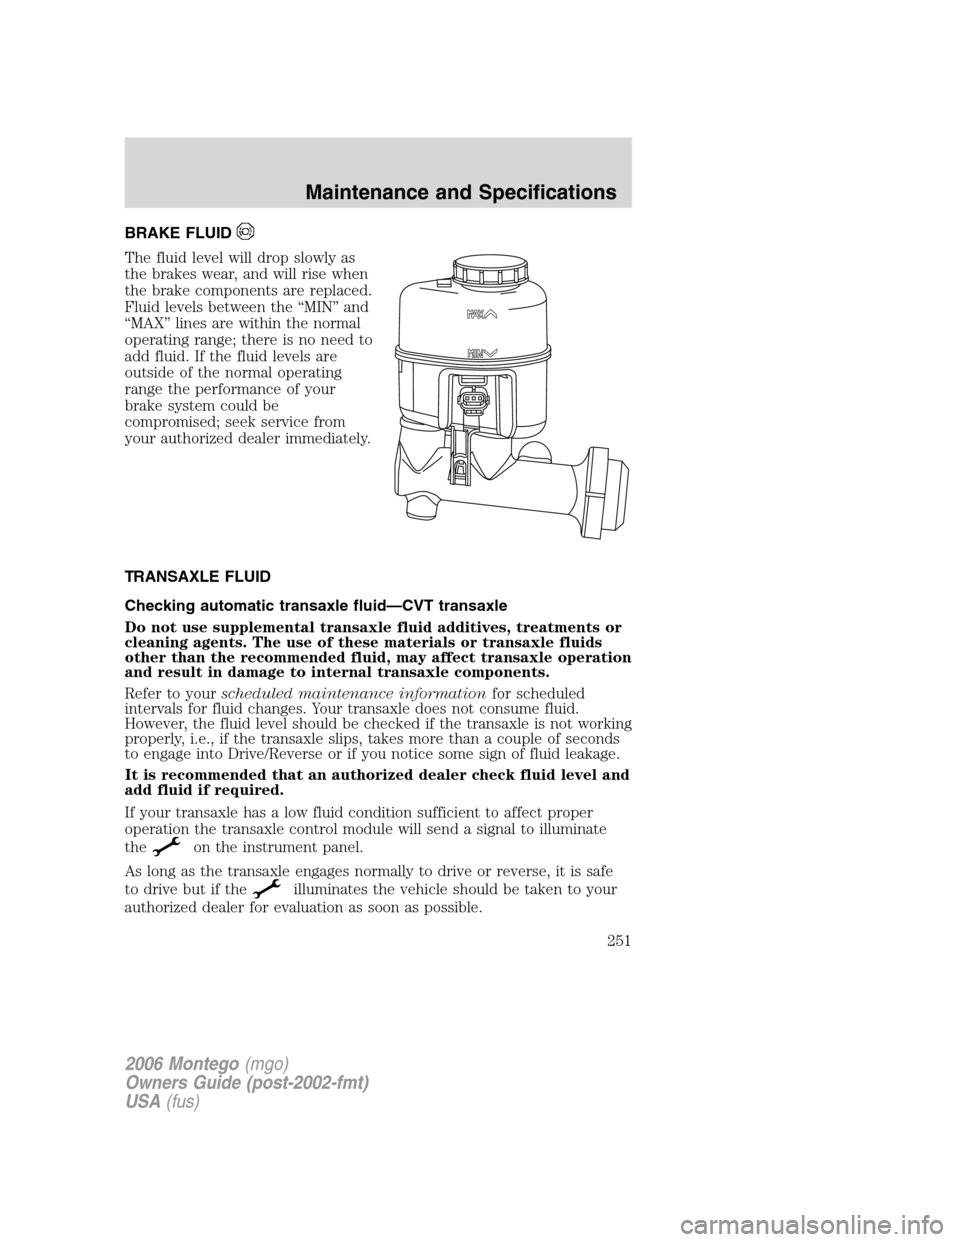 Mercury Montego 2006  Owners Manuals BRAKE FLUID
The fluid level will drop slowly as
the brakes wear, and will rise when
the brake components are replaced.
Fluid levels between the “MIN” and
“MAX” lines are within the normal
oper